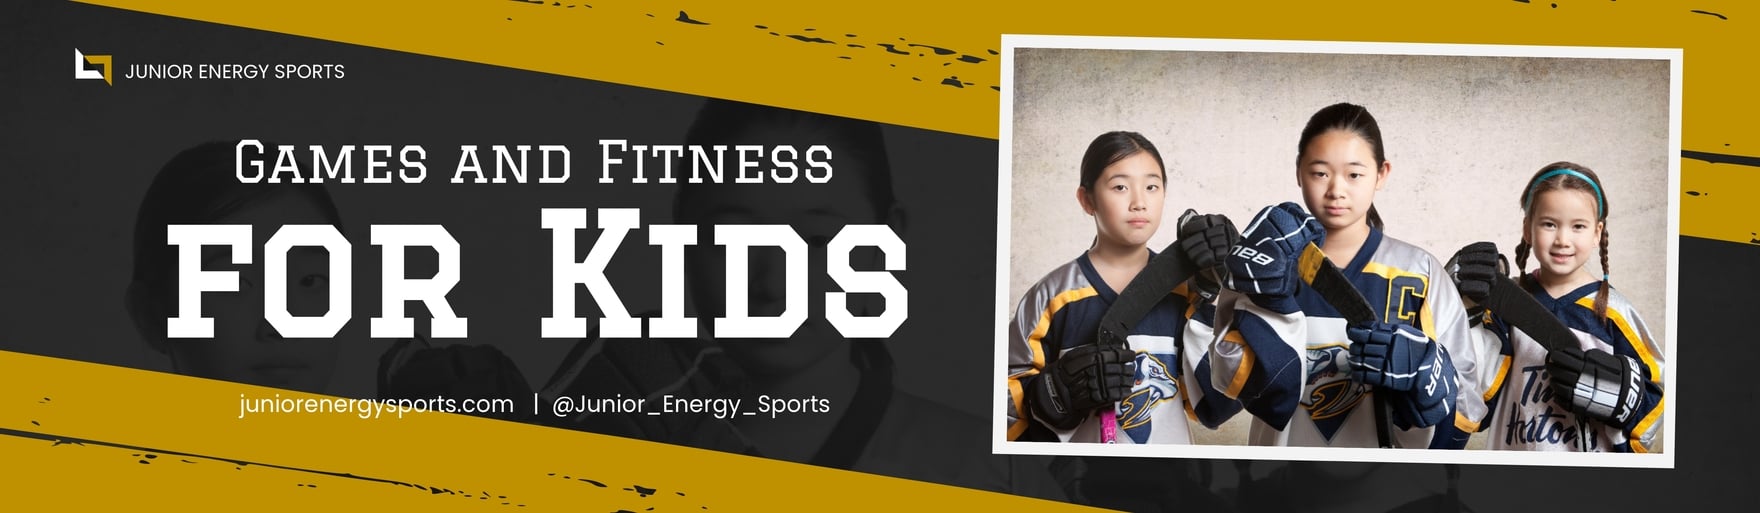 Kids Sports Billboard Template in Word, Google Docs, Apple Pages, Publisher